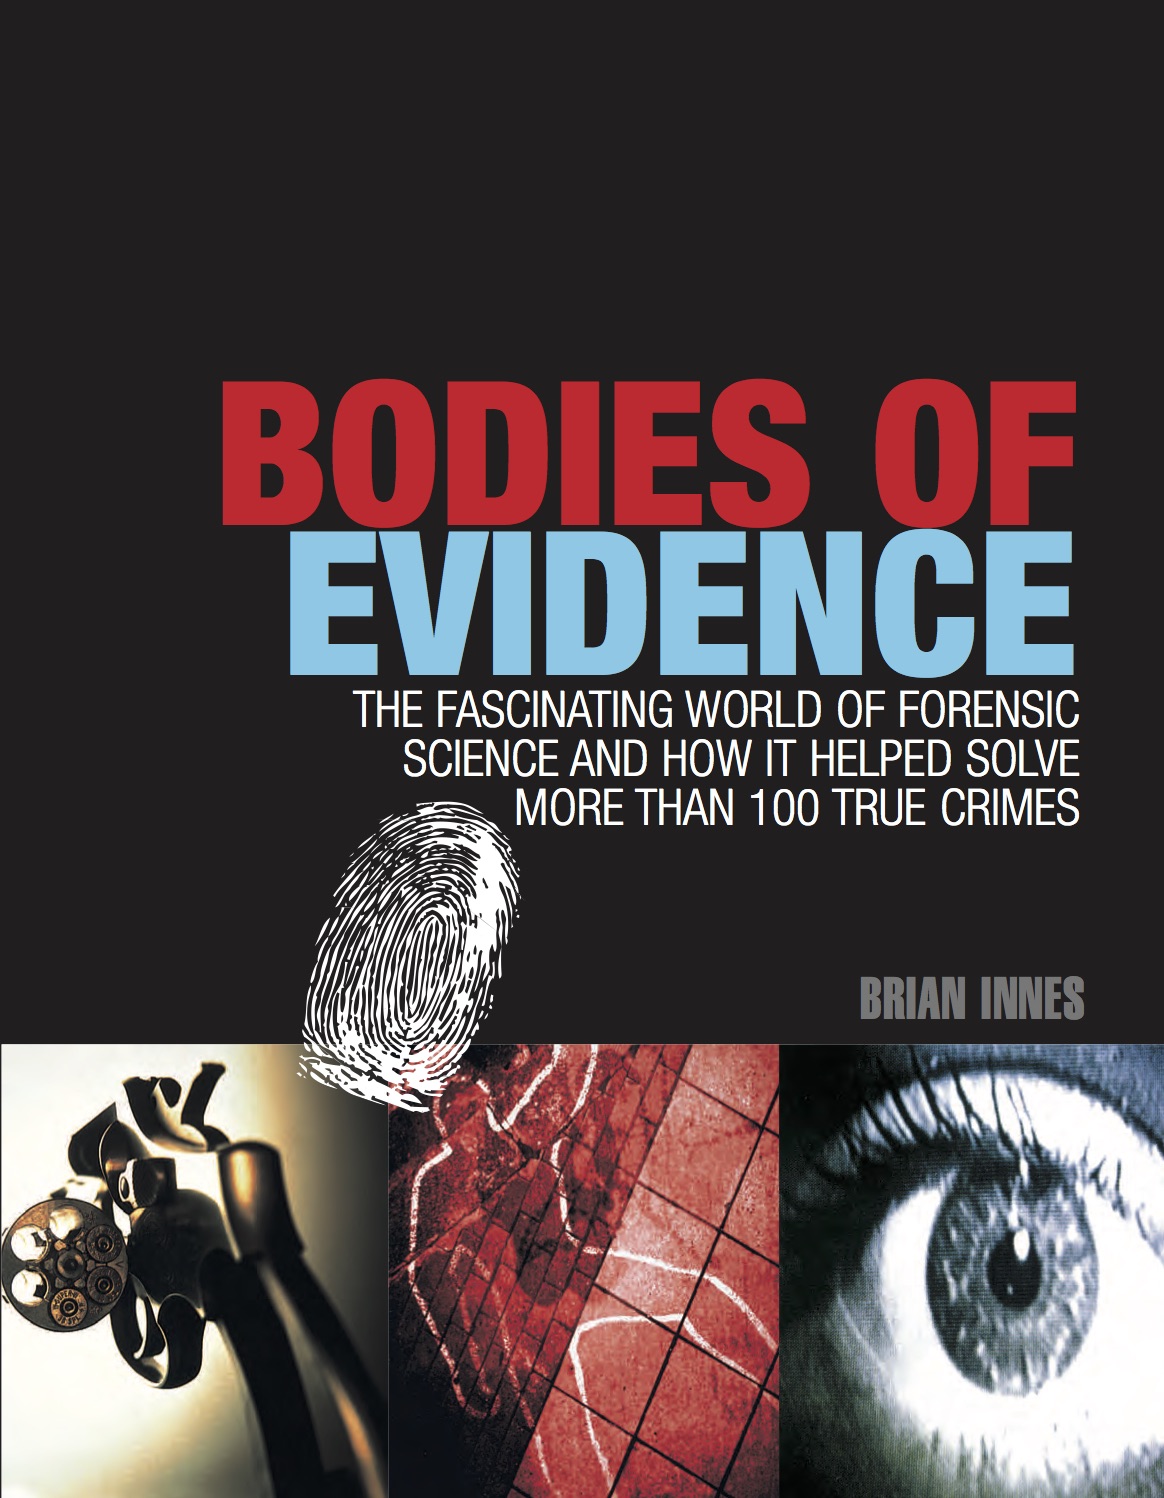 a broad body of evidence subject to revisions